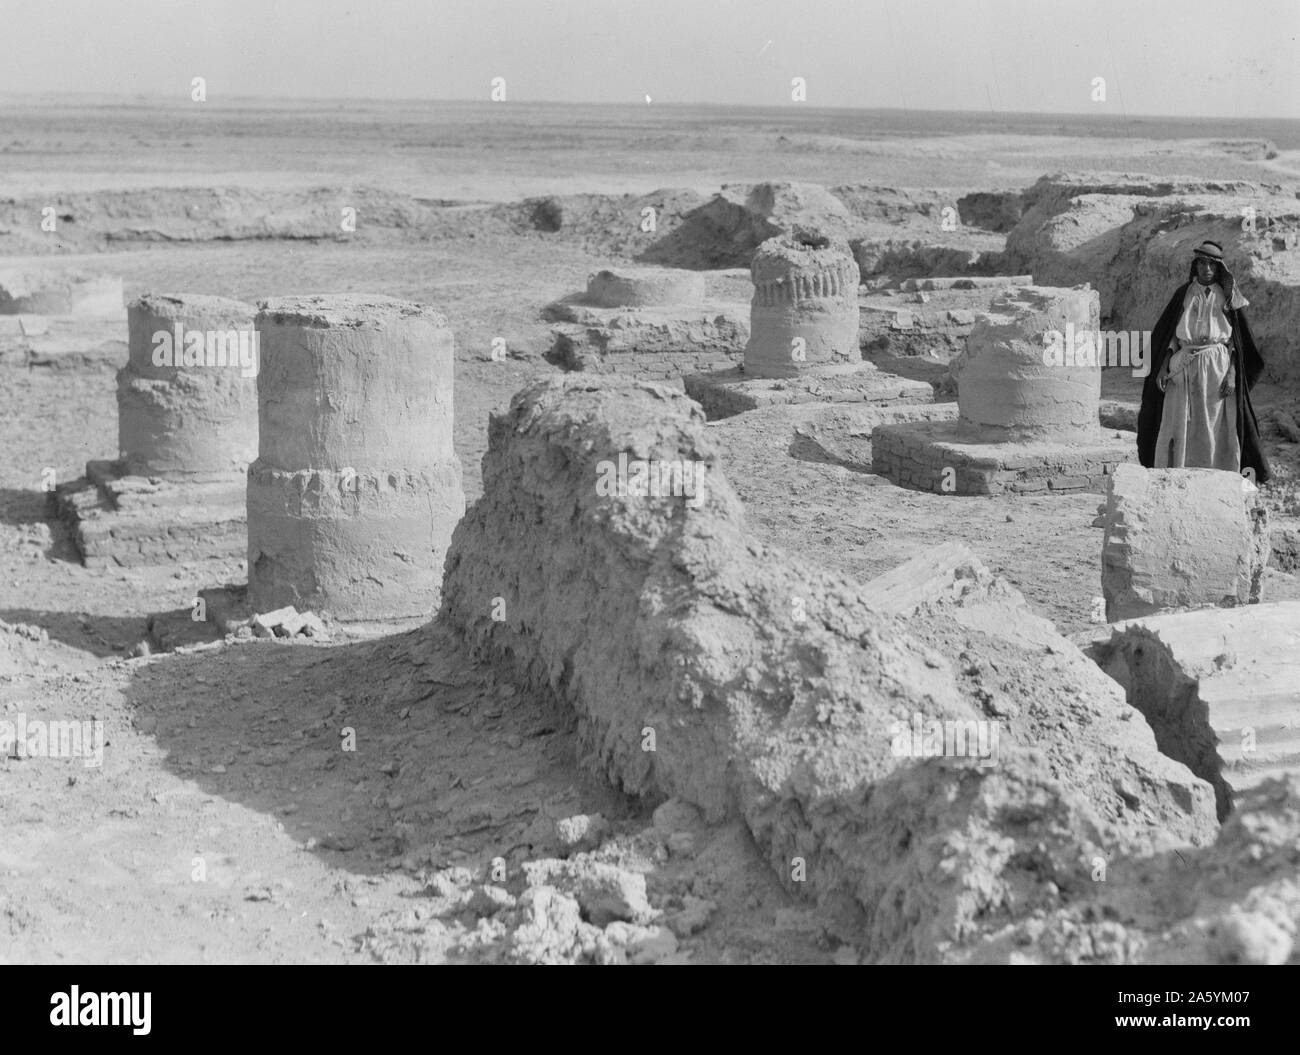 Iraq. Kish. (Tel-Uhaimir) in Mesopotamia, considered to have been located near the modern Tell al-Uhaimir in the Babil Governorate of Iraq, some 12 km east of Babylon and 80 km south of Baghdad.Kish was occupied from the Jemdet Nasr period (ca. 3100 BC), gaining prominence as one of the pre-eminent powers in the region during the early dynastic period Stock Photo